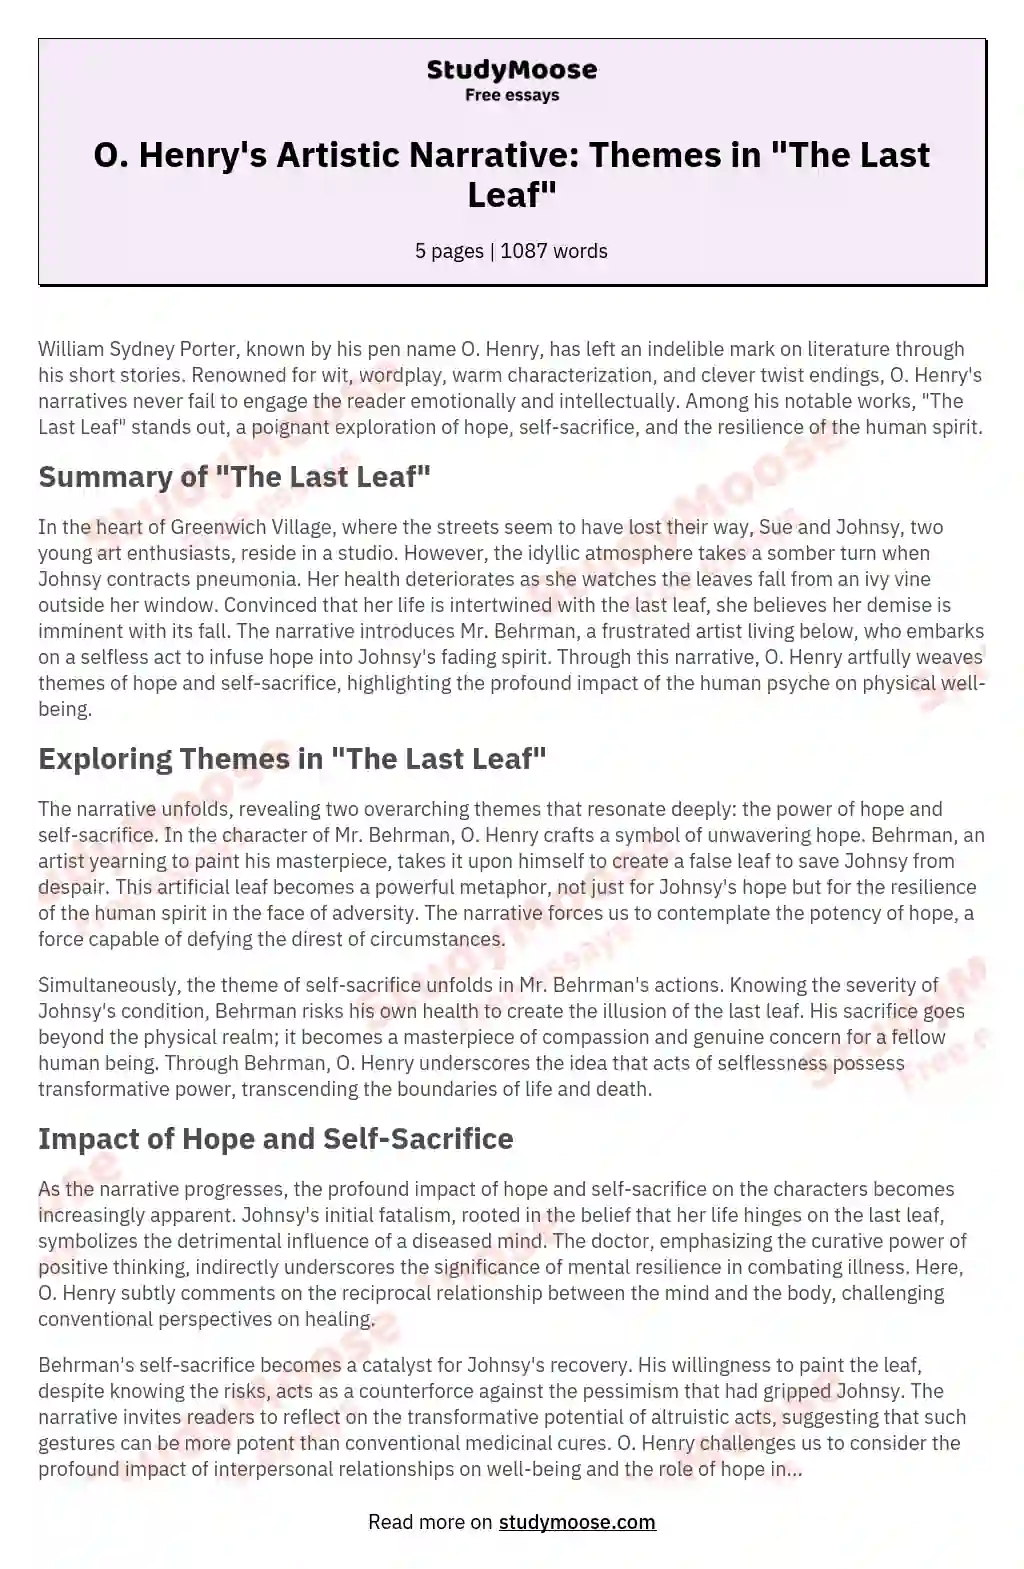 Stylistic Analysis of “The Last Leaf” by O. Henry